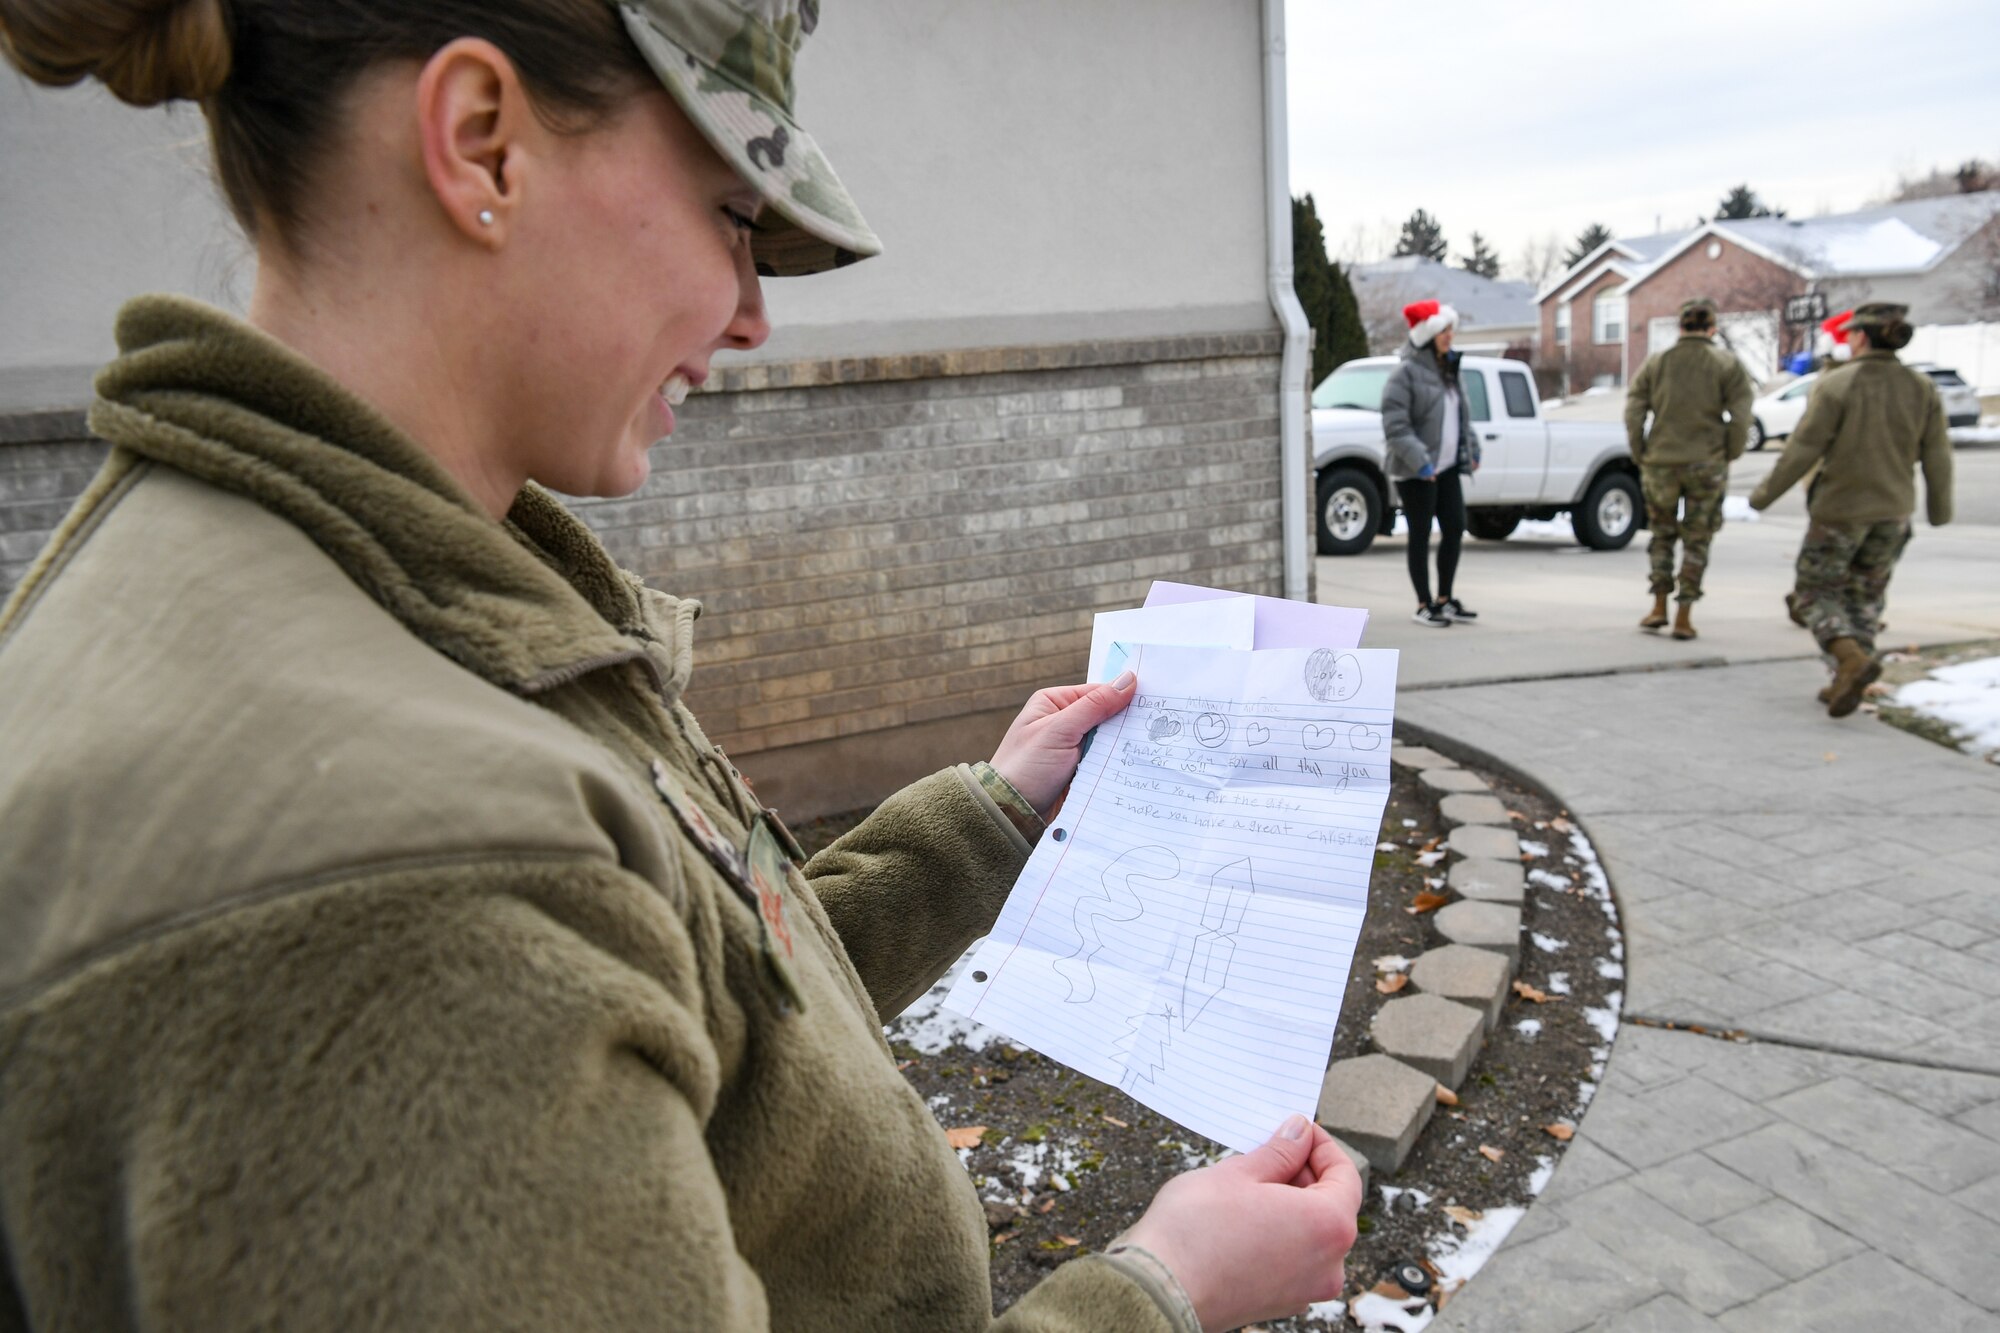 Senior Airman Hayley Sewell, 419th Medical Squadron, reads a letter from a foster child after delivering gifts Dec. 18, 2019, as part of a volunteer effort called Santa Brigade, a joint venture with Utah Foster Care Foundation and volunteers from Hill Air Force Base, Utah.  Around 85 Airmen from various commands played Santa for the day delivering 537 gifts to over 140 foster care families around Northern Utah. (U.S. Air Force photo by Cynthia Griggs)